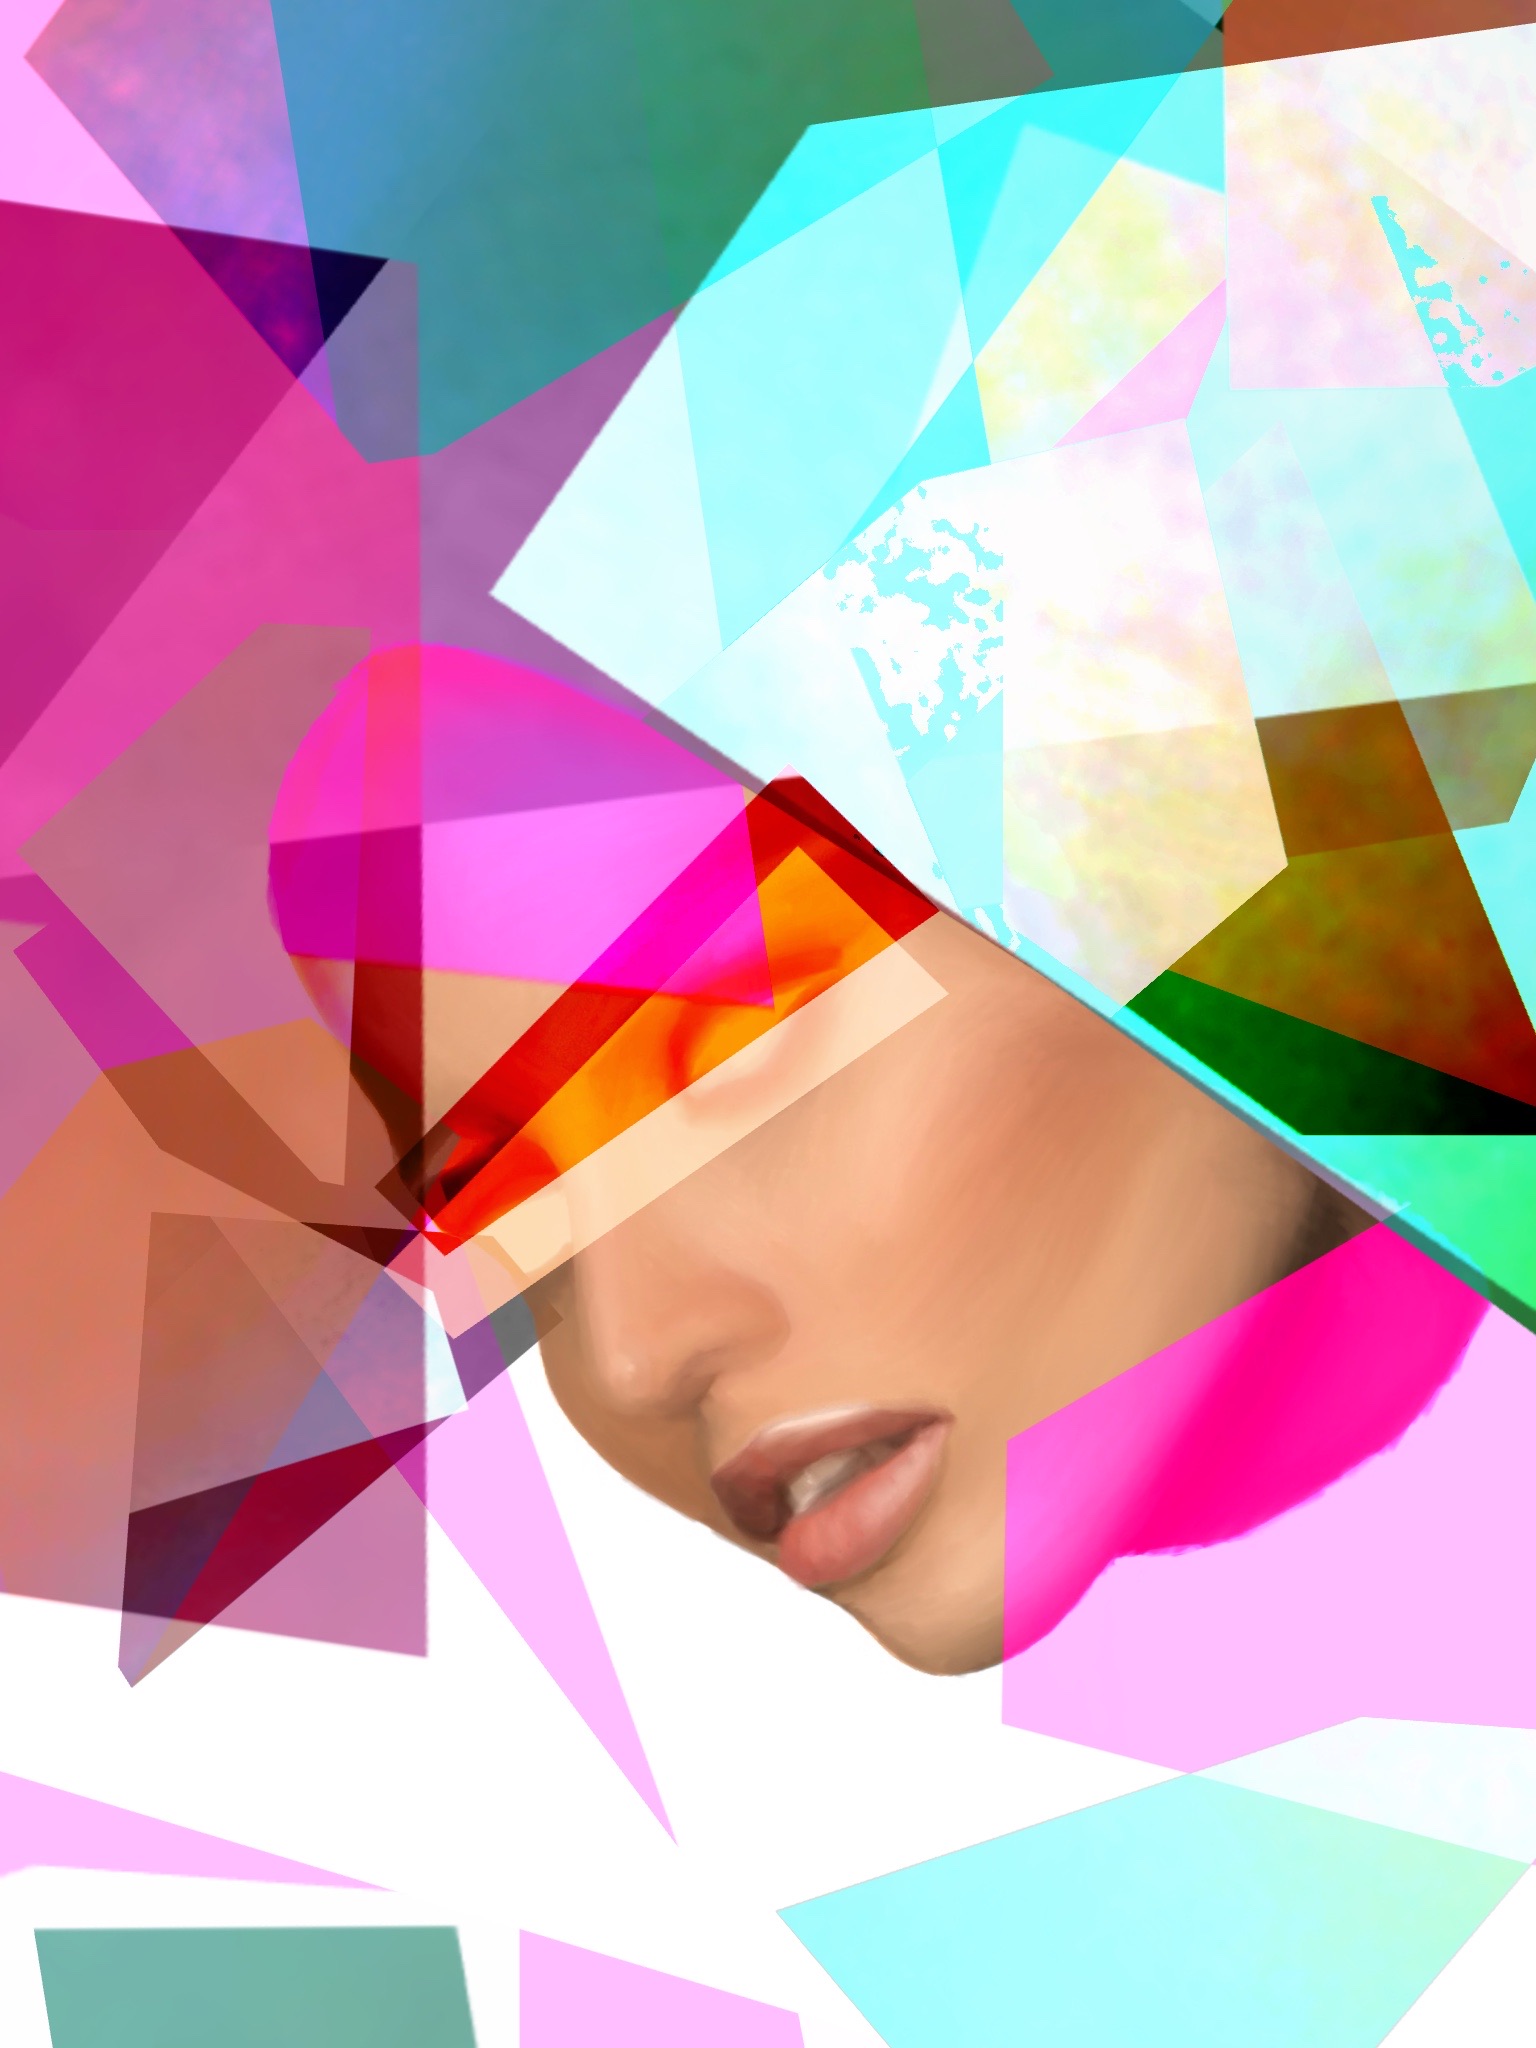 Abstract drawing of a woman's face with various colors.